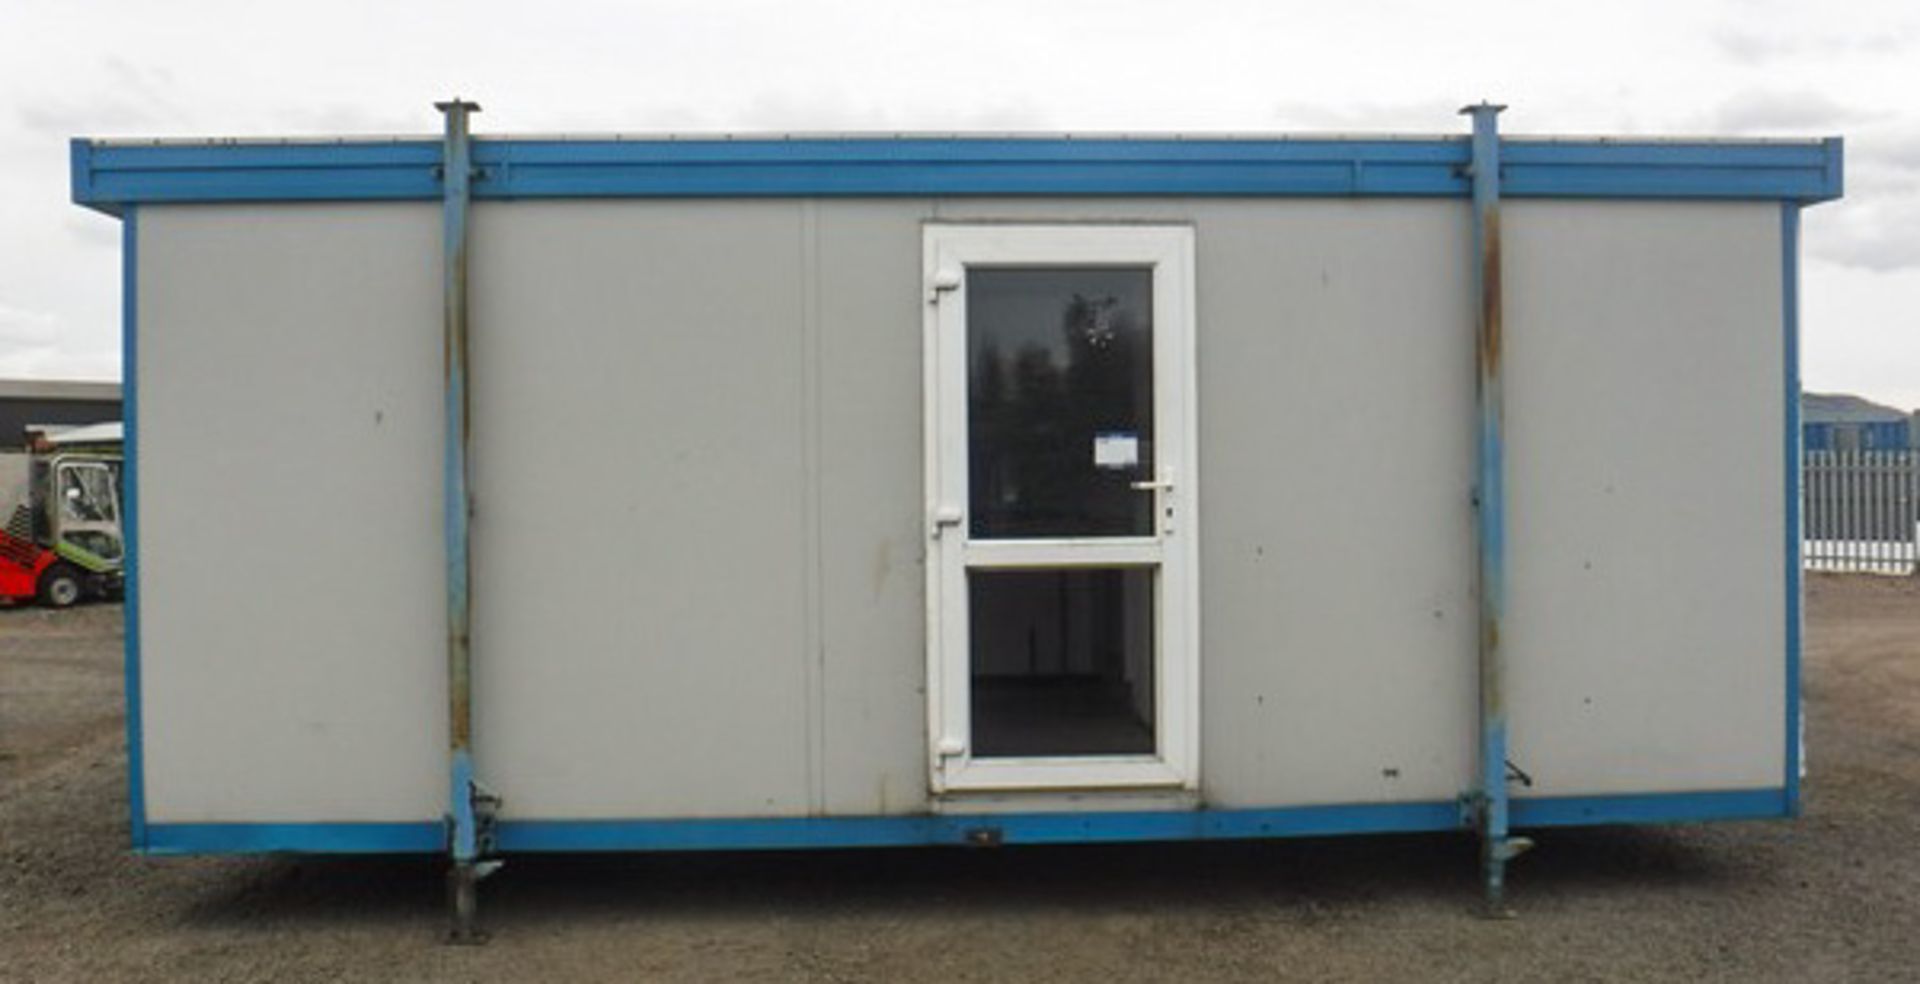 USED 20 X 8 CANTEEN UNIT, 2 SEPARATE SEATING AREAS, WORKTOP, SINK & WATER HEATER - Image 2 of 13